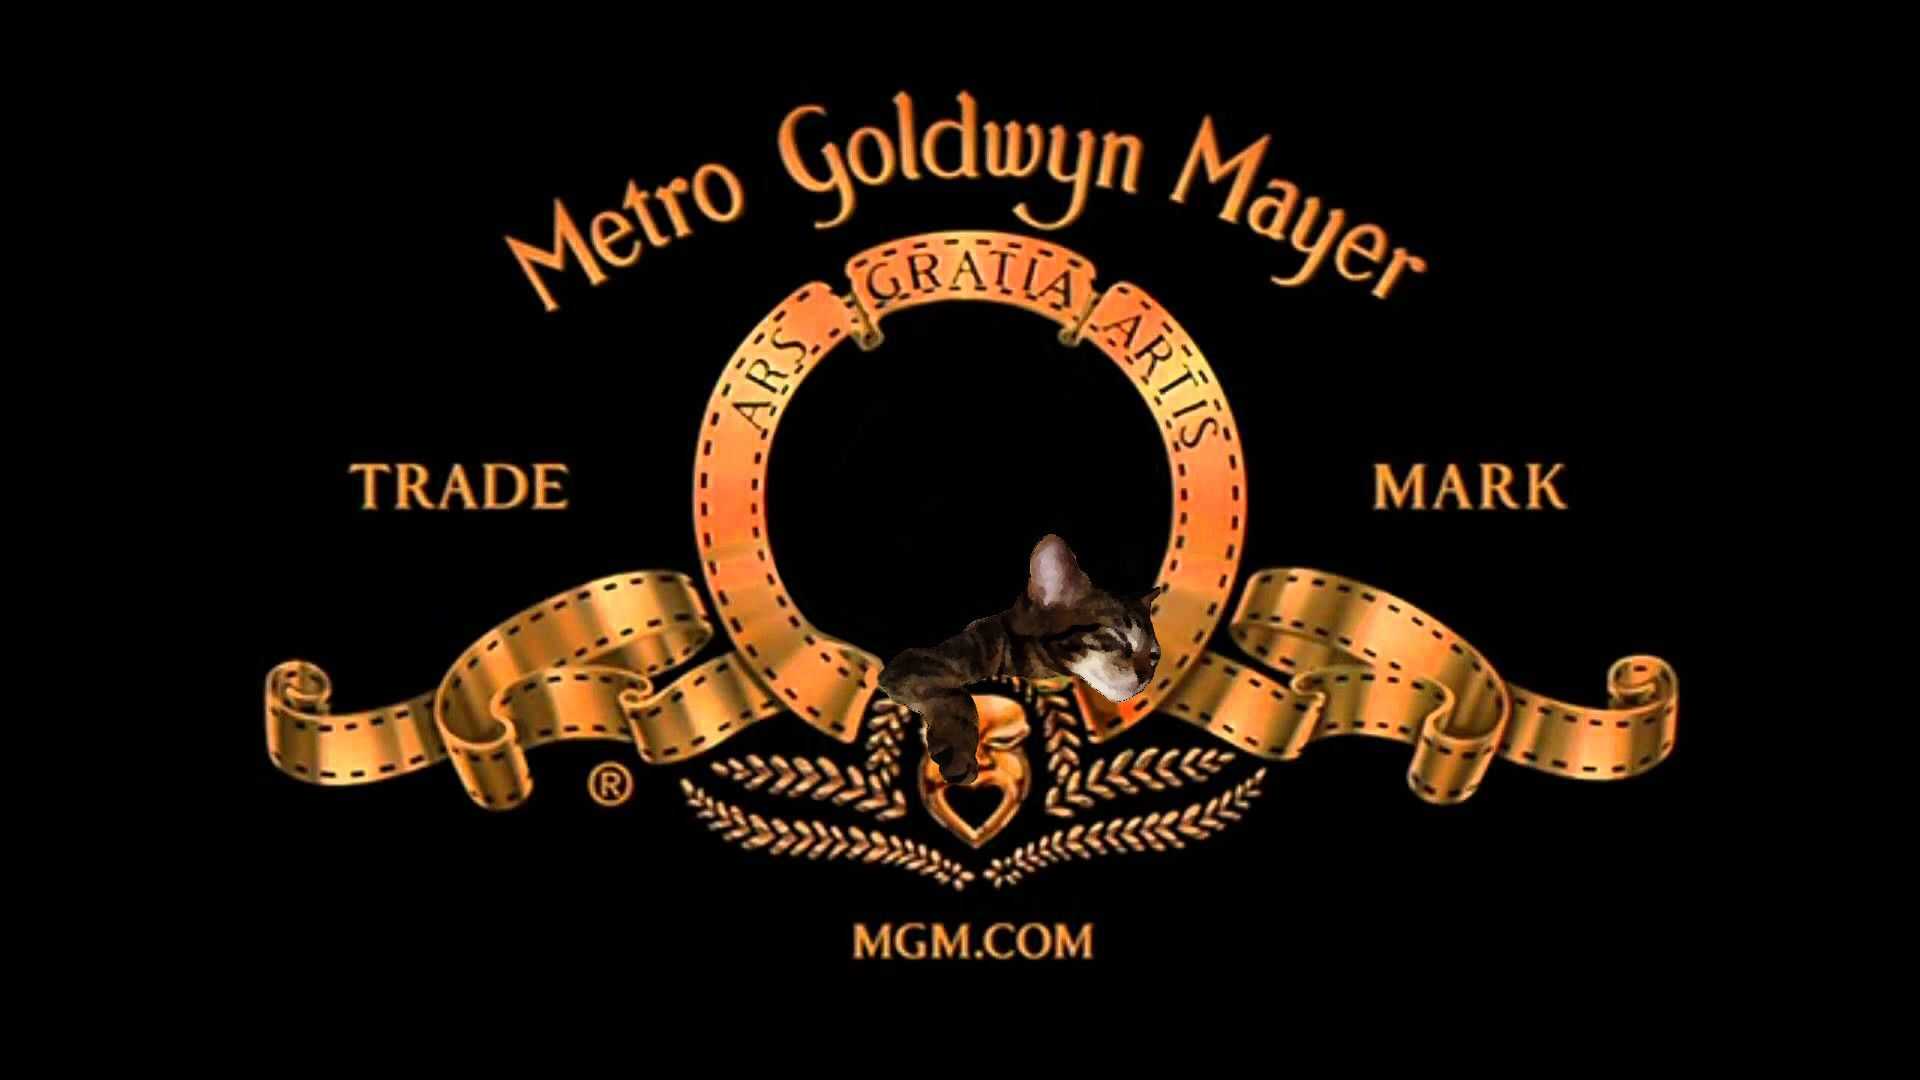 Mgm holdings - mgm holdings